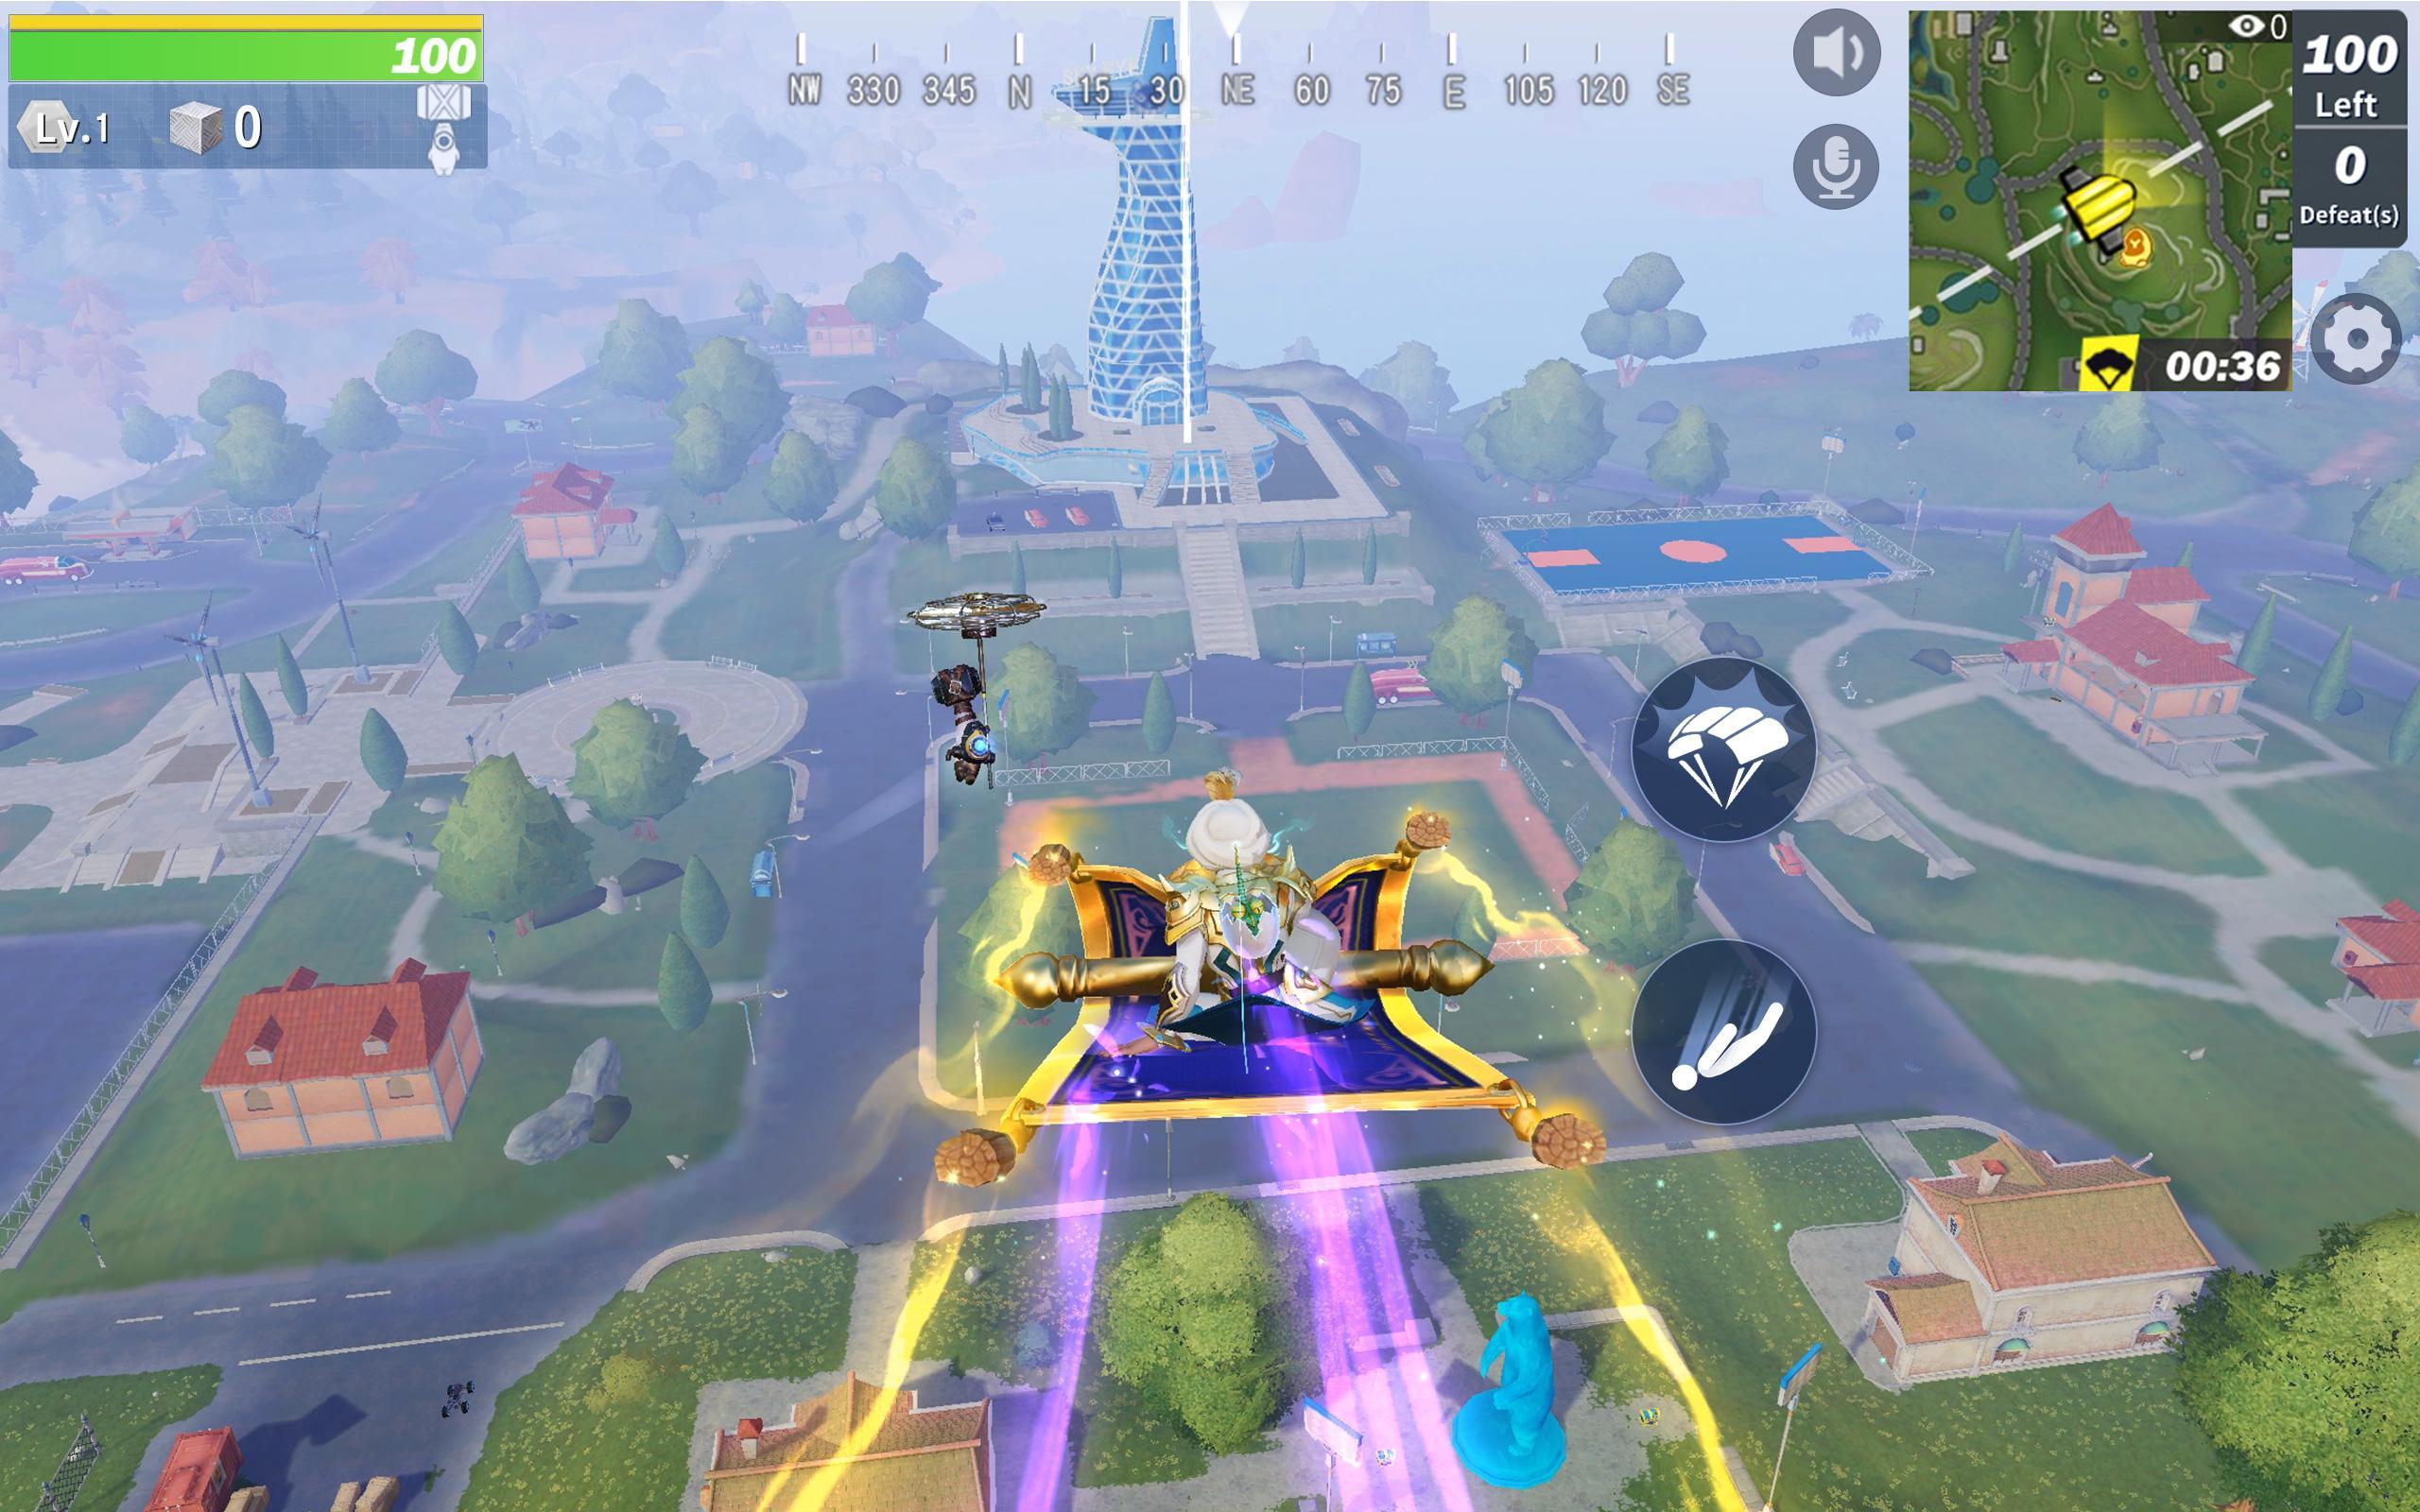 Creative Destruction For Android Apk Download - download robloxapk for android apk s